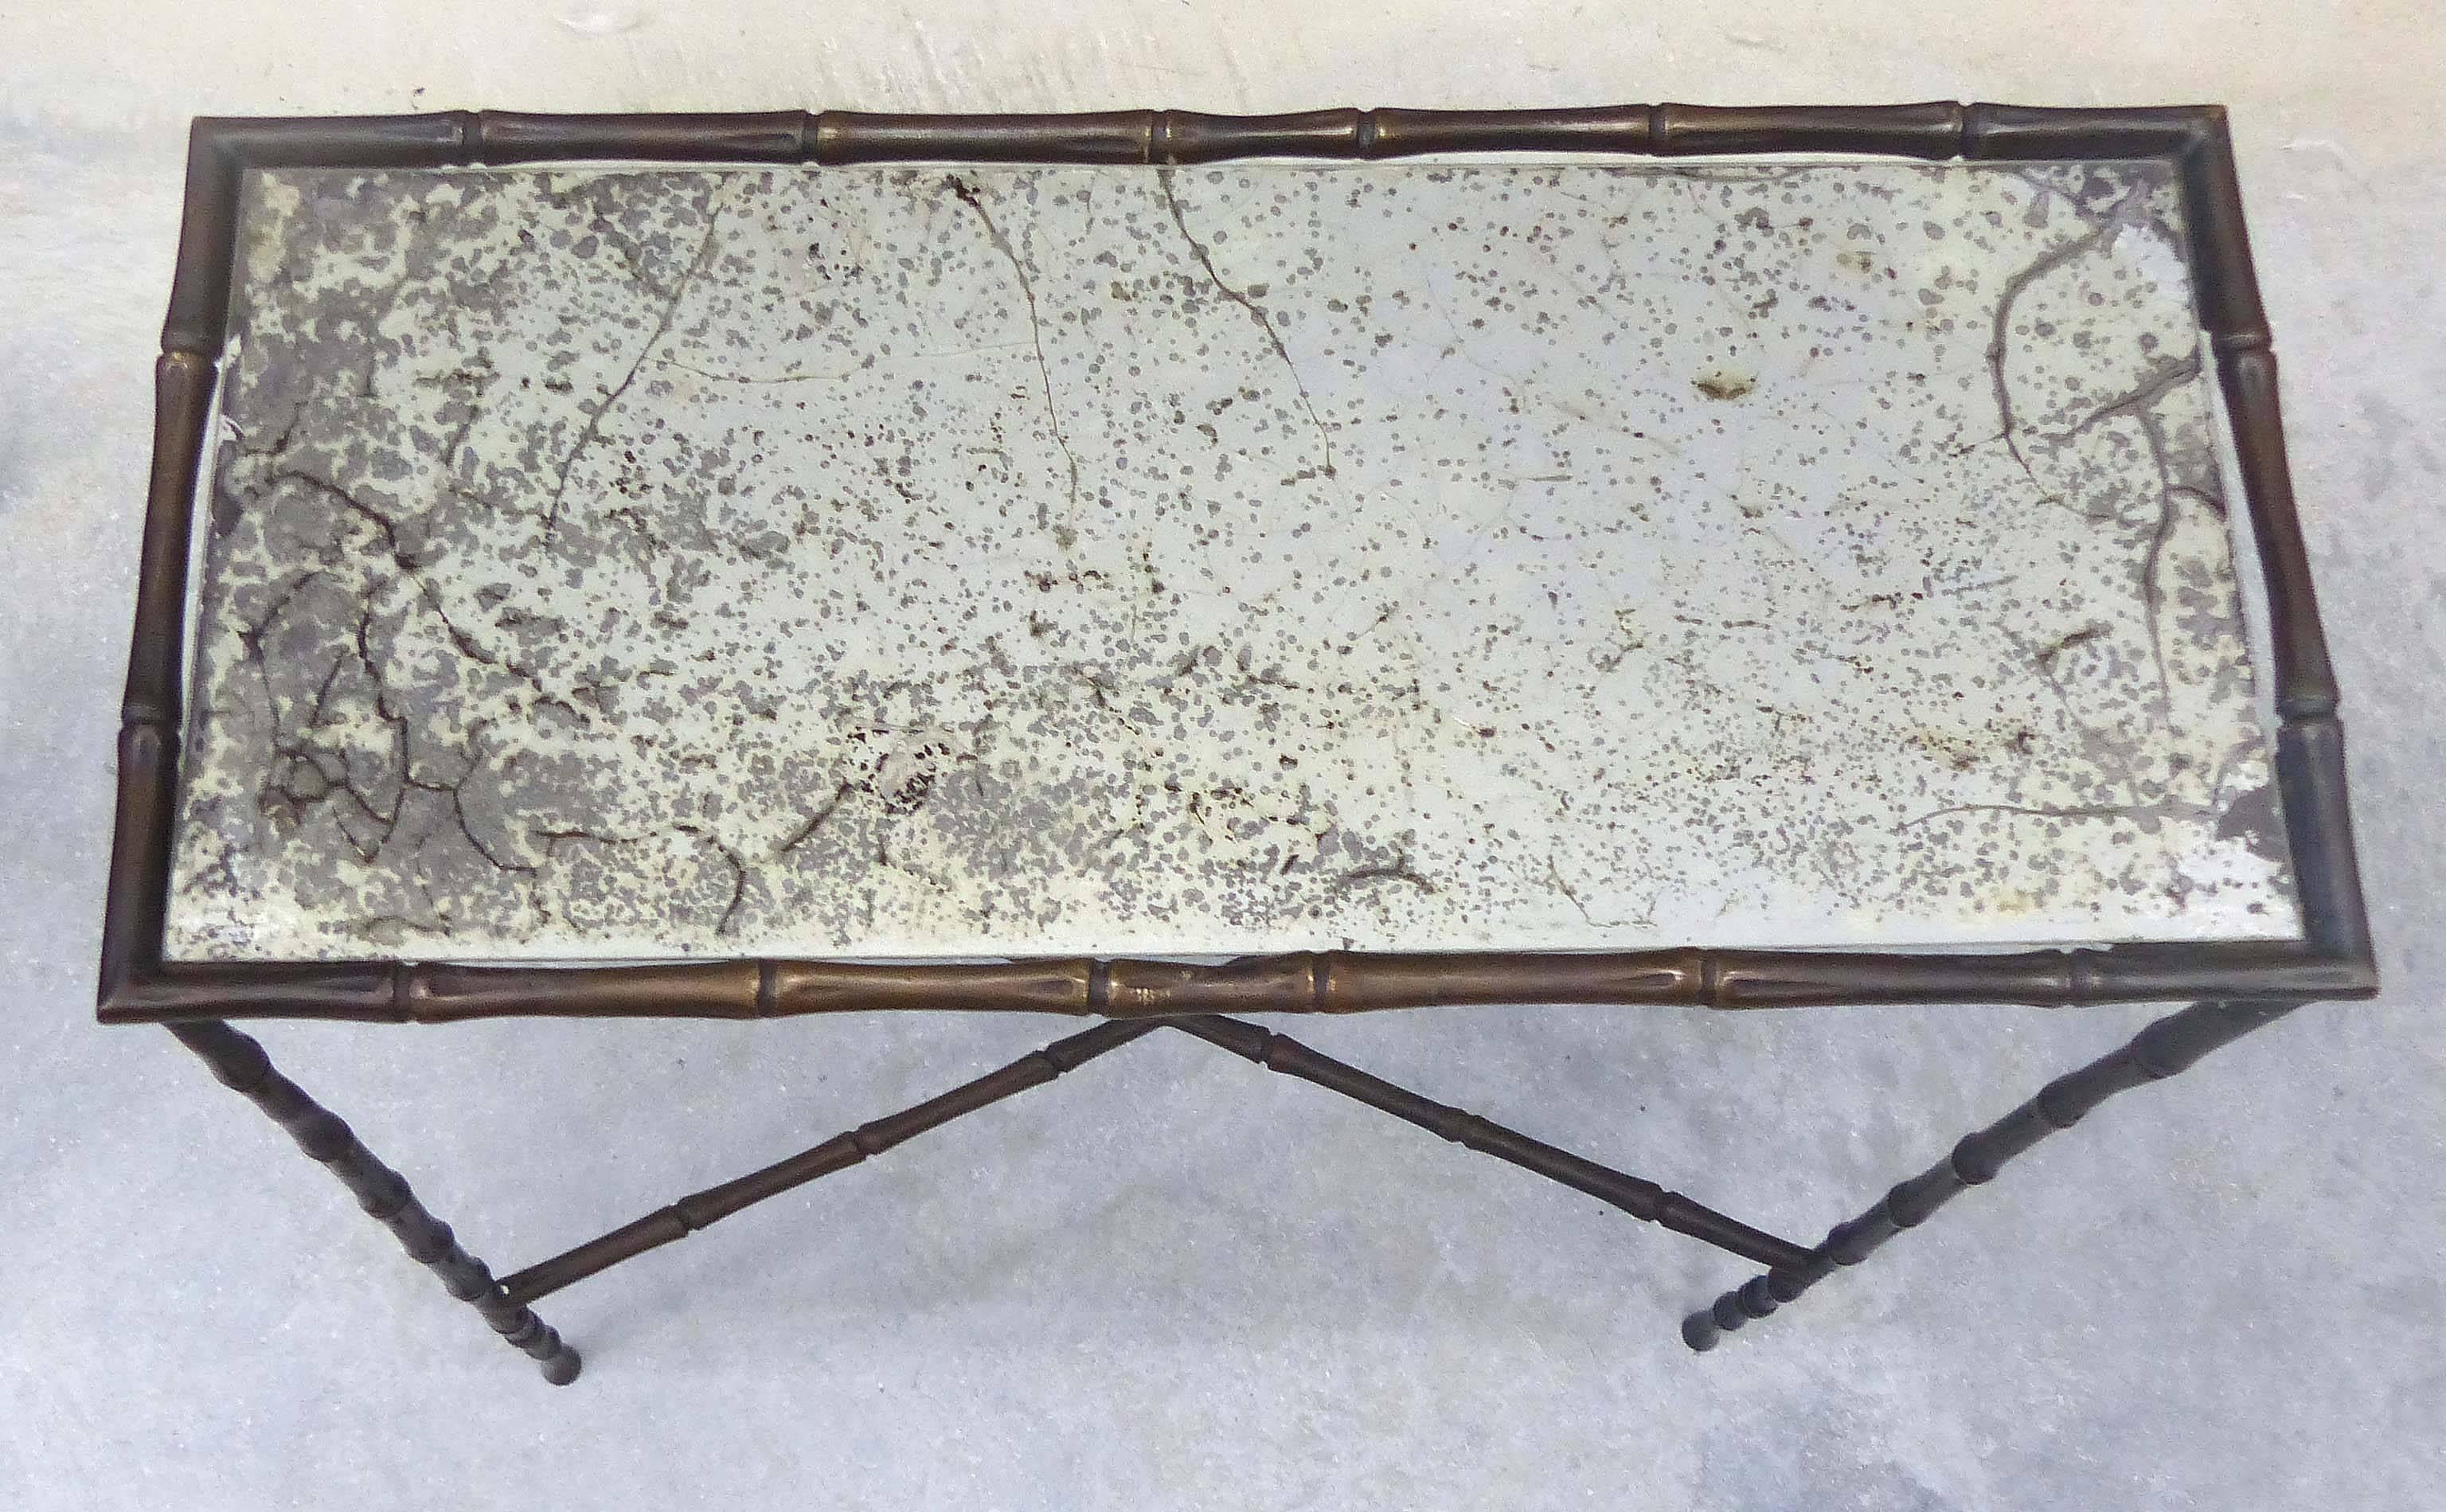 Neoclassical Revival Bronze and Mirrored Faux Bamboo Jansen Tables, circa 1950